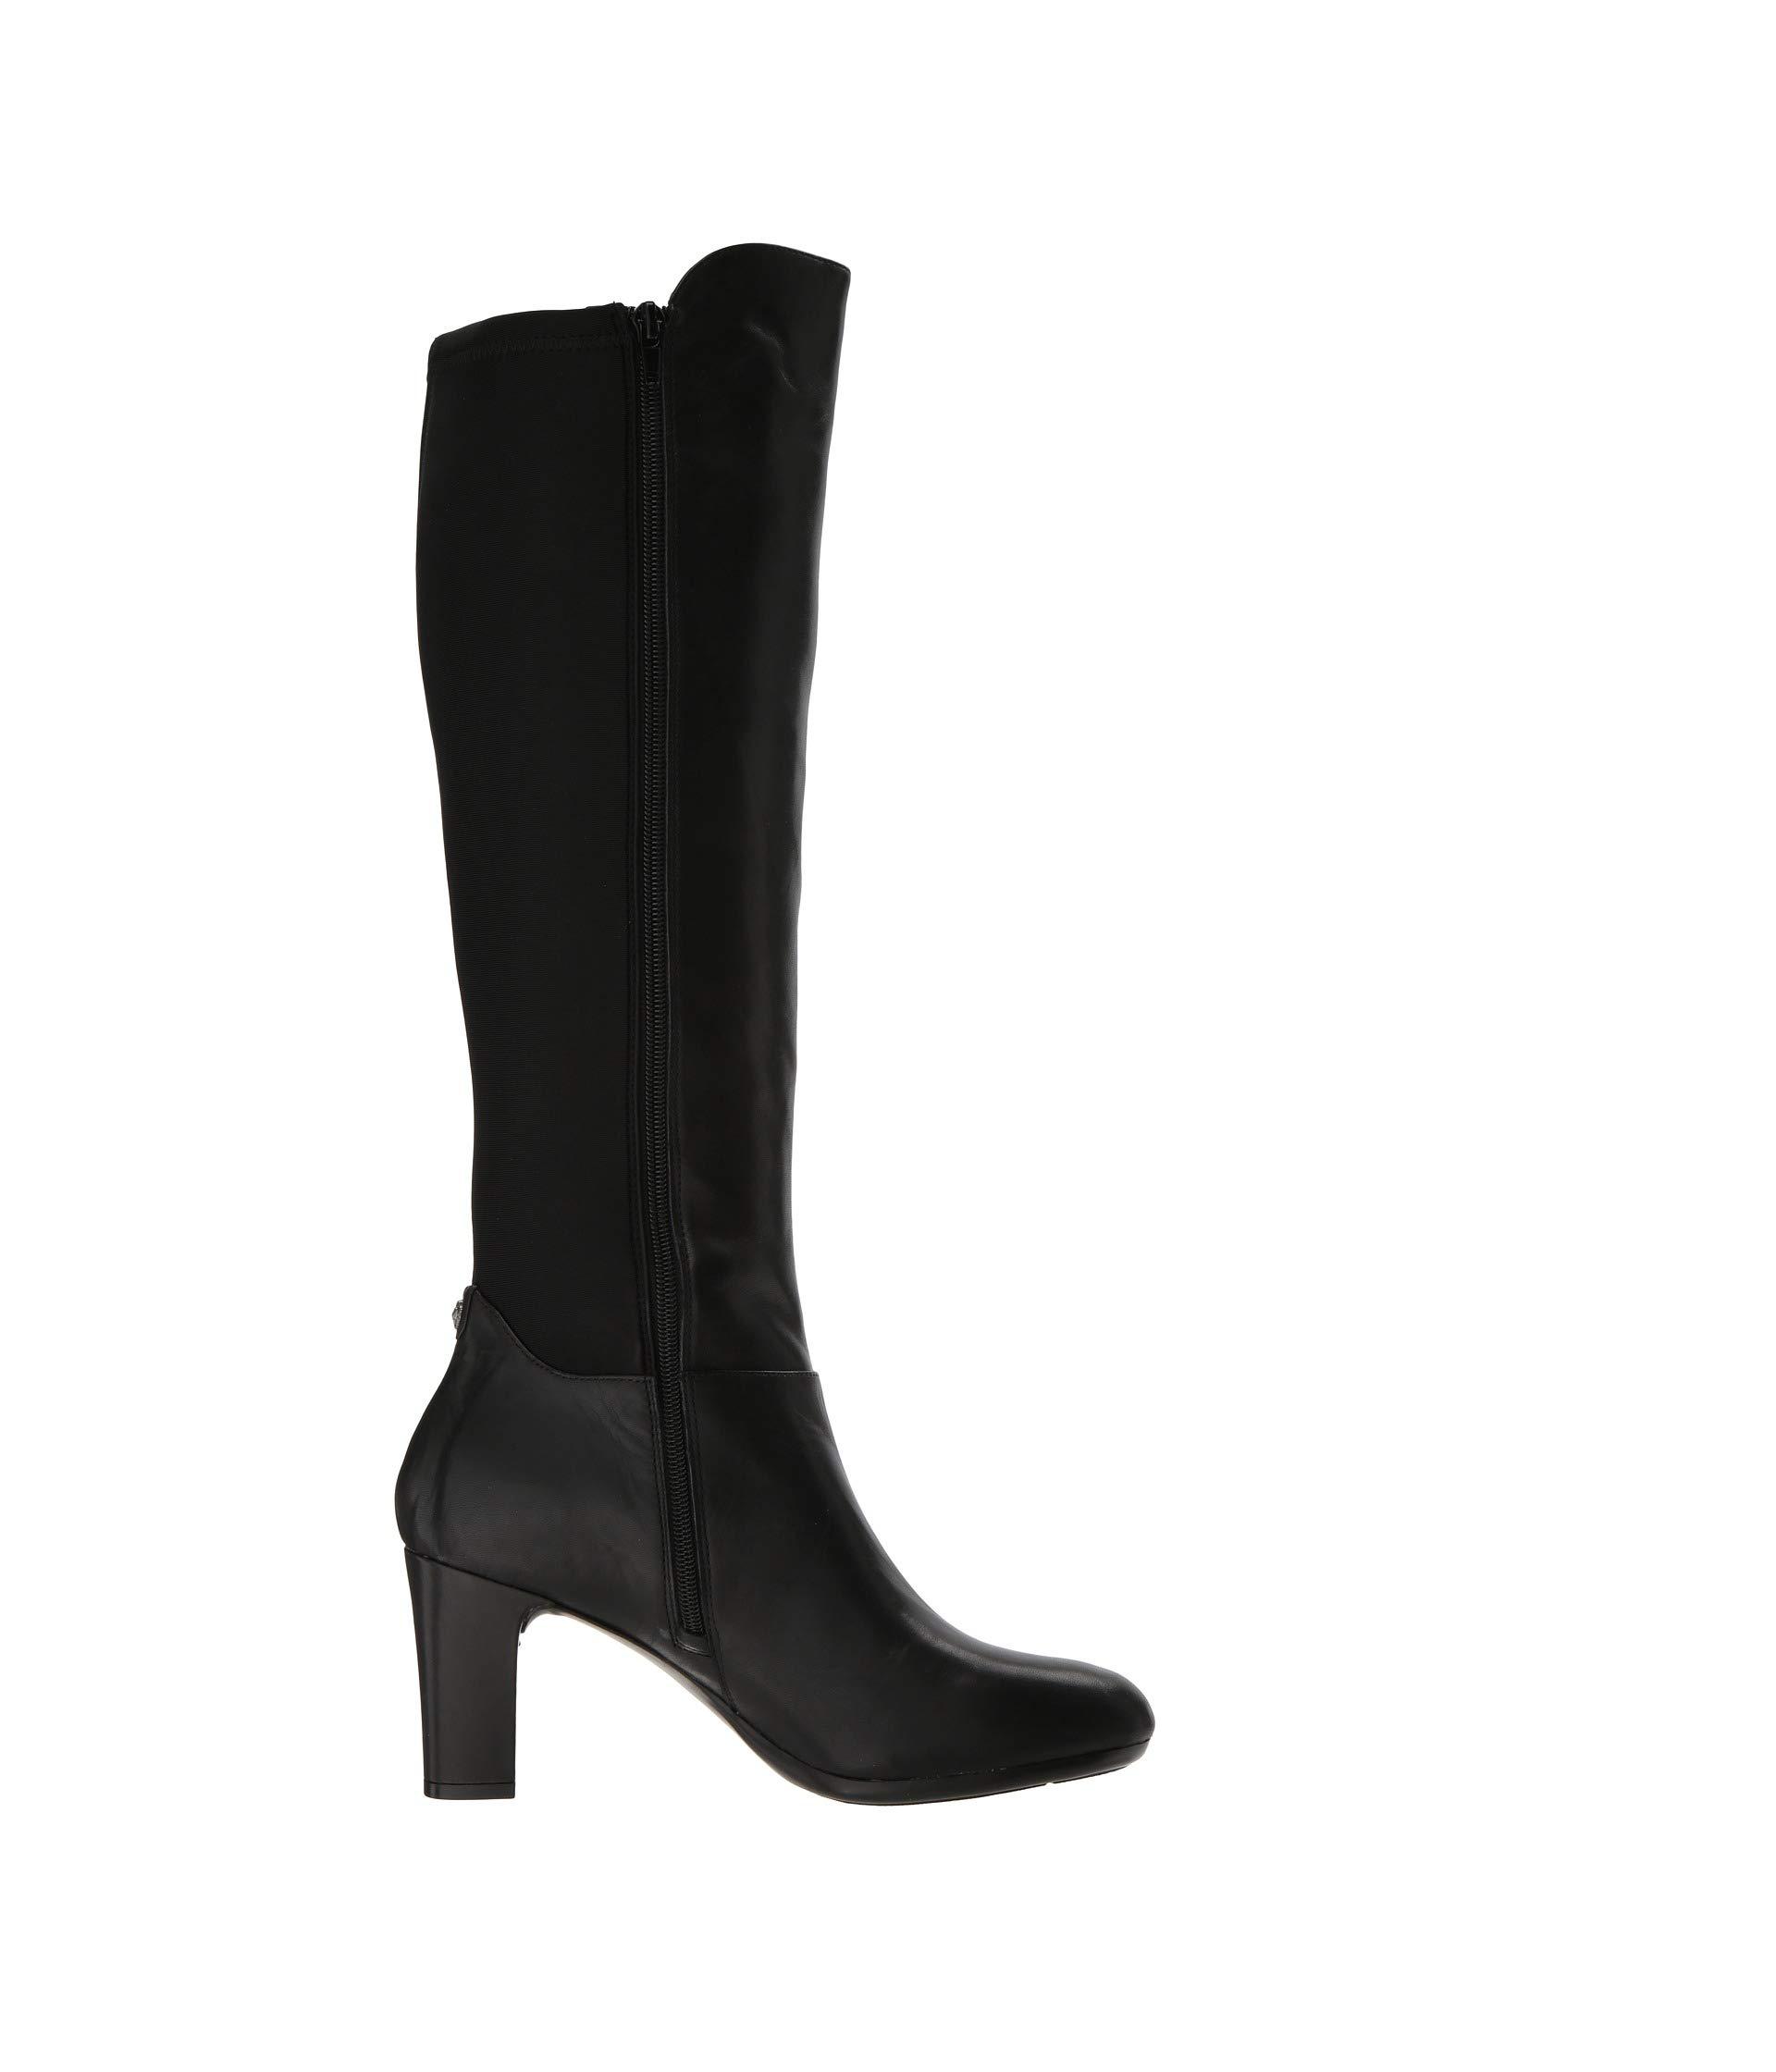 Anne Klein Leather Sylvie Boot Wide Calf in Black Leather (Black) - Lyst